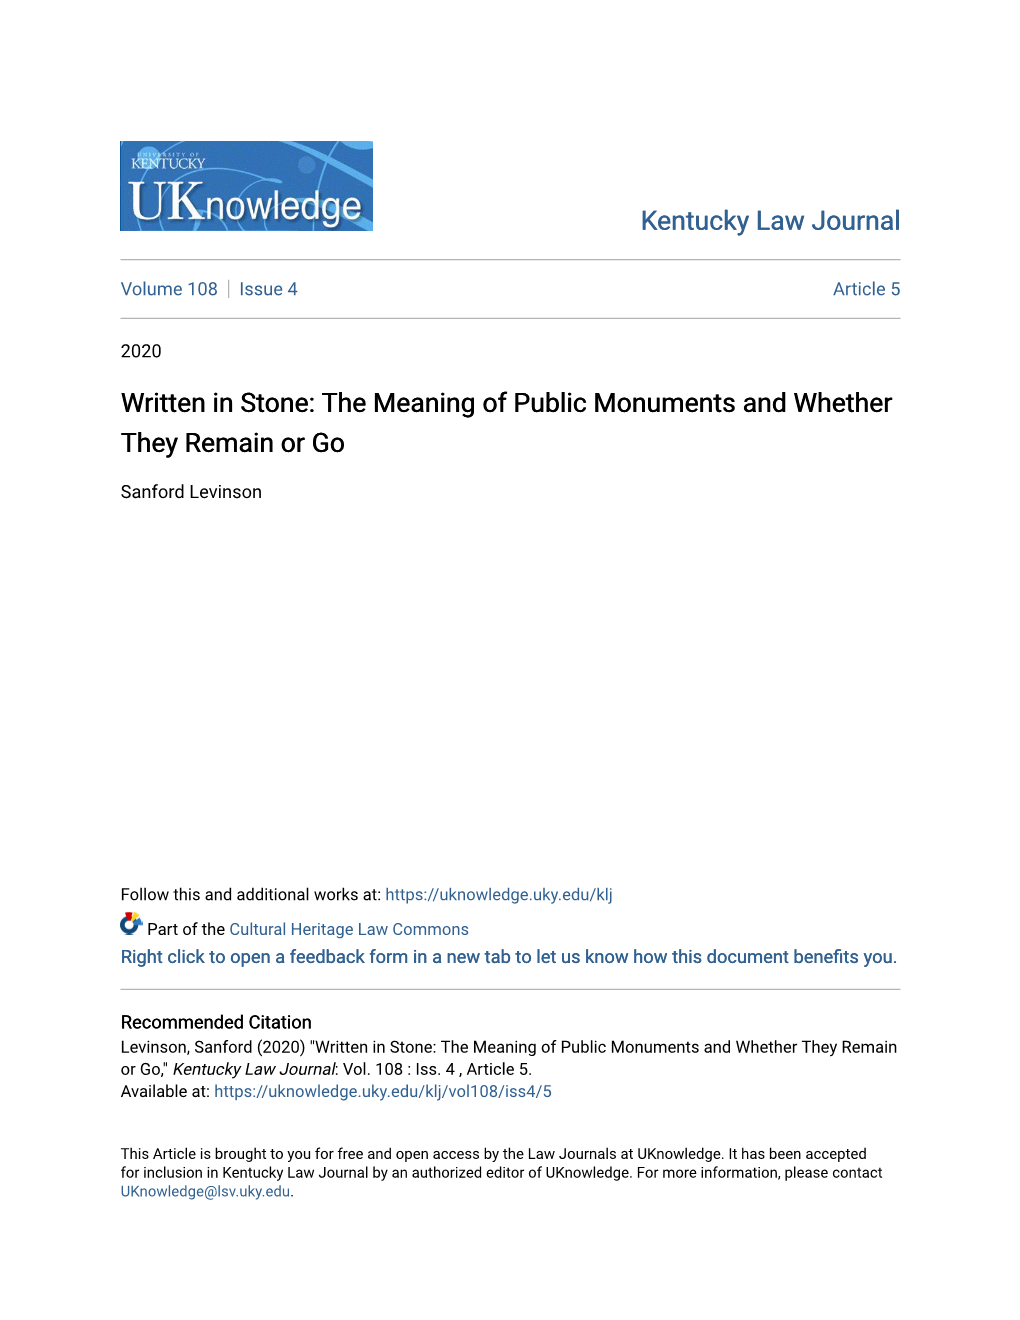 The Meaning of Public Monuments and Whether They Remain Or Go